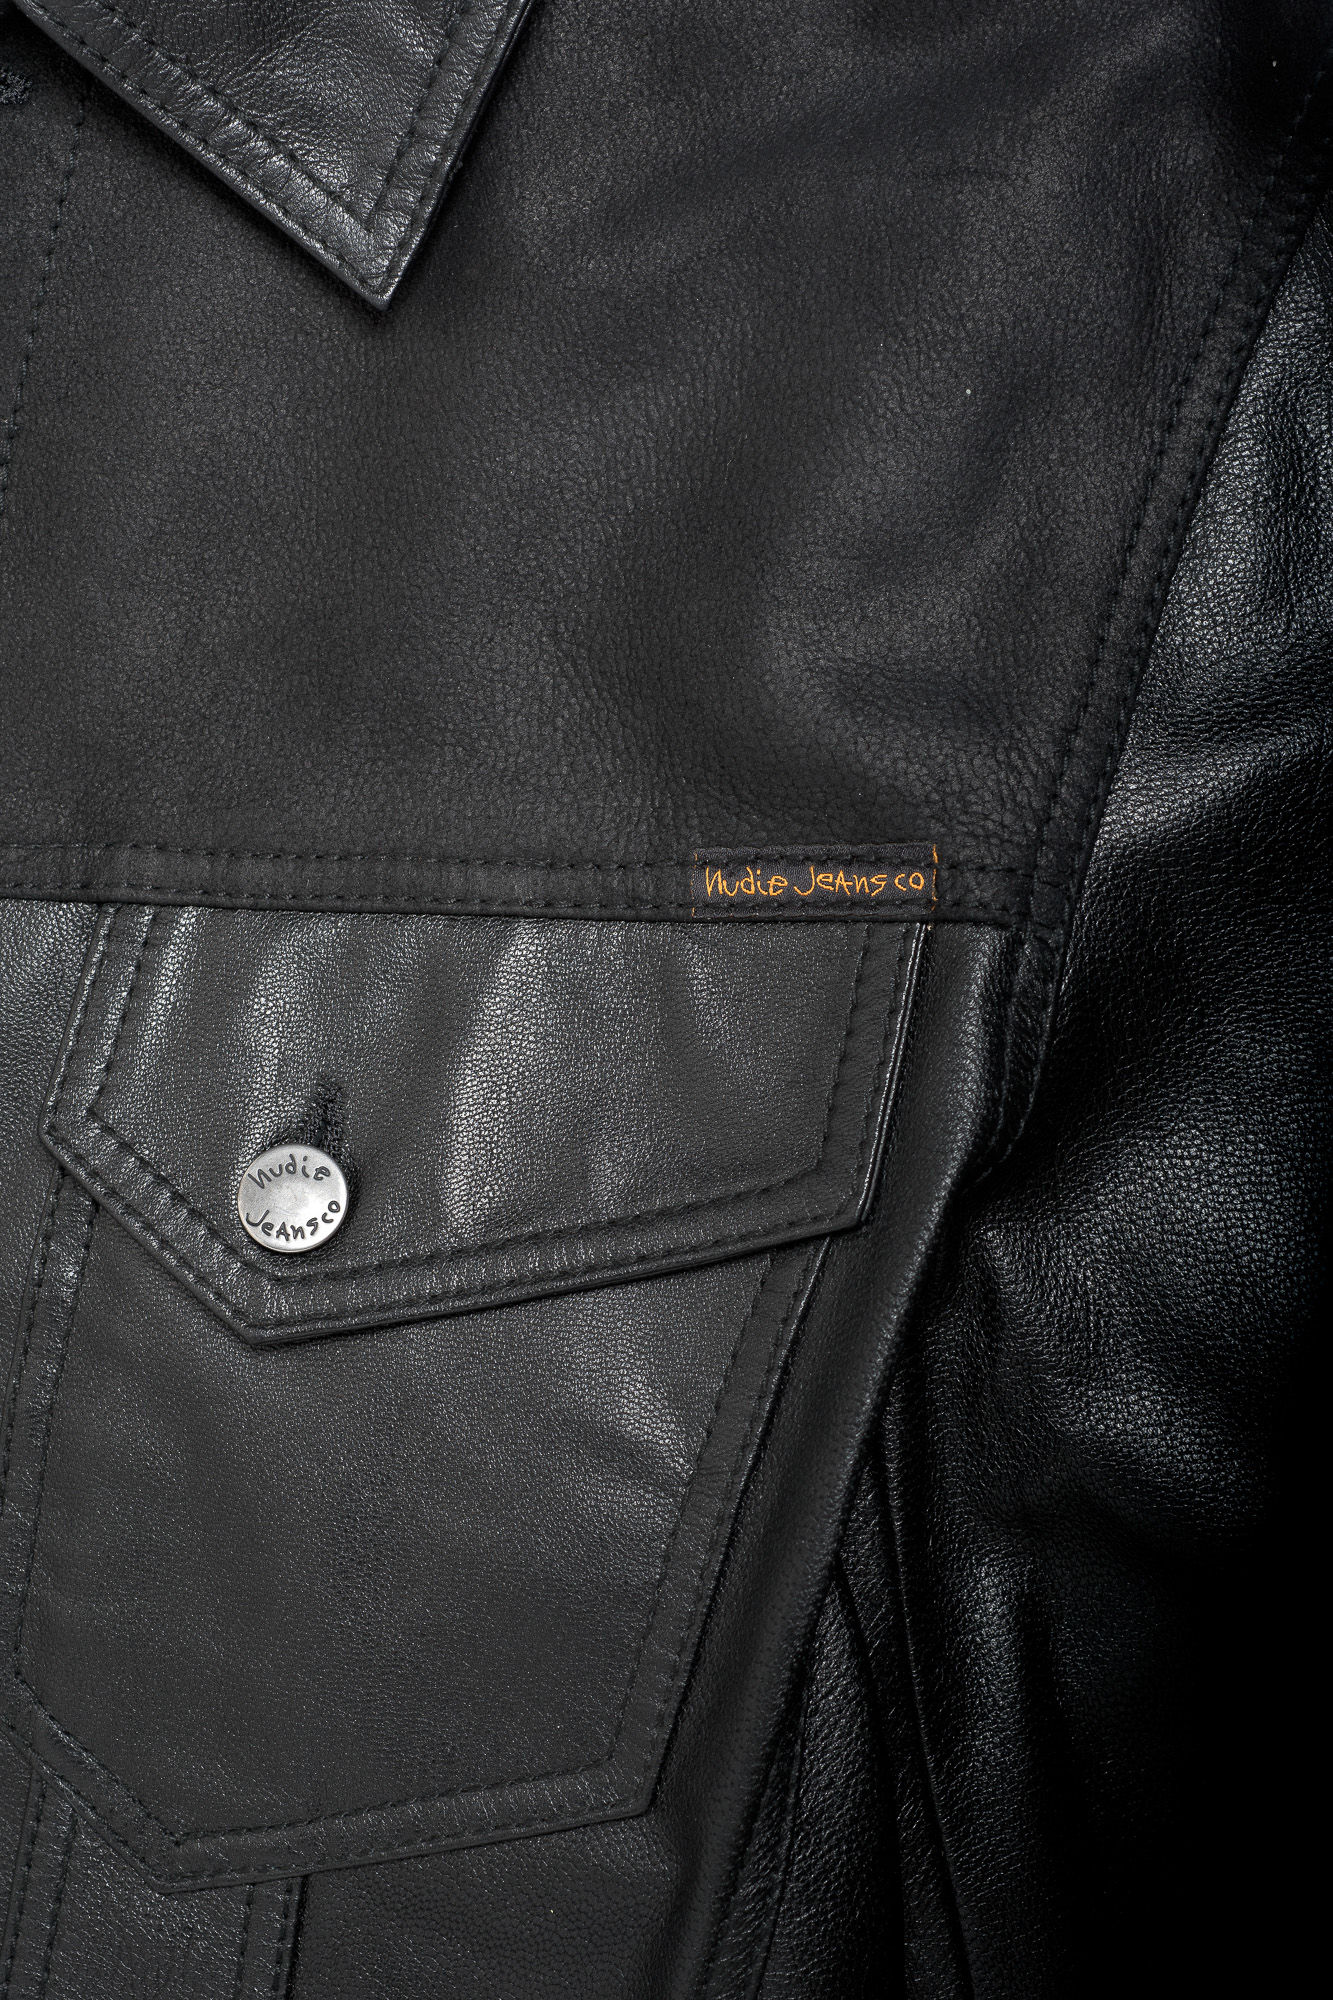 Perry Leather _ Crust Jkt Black 160339 02